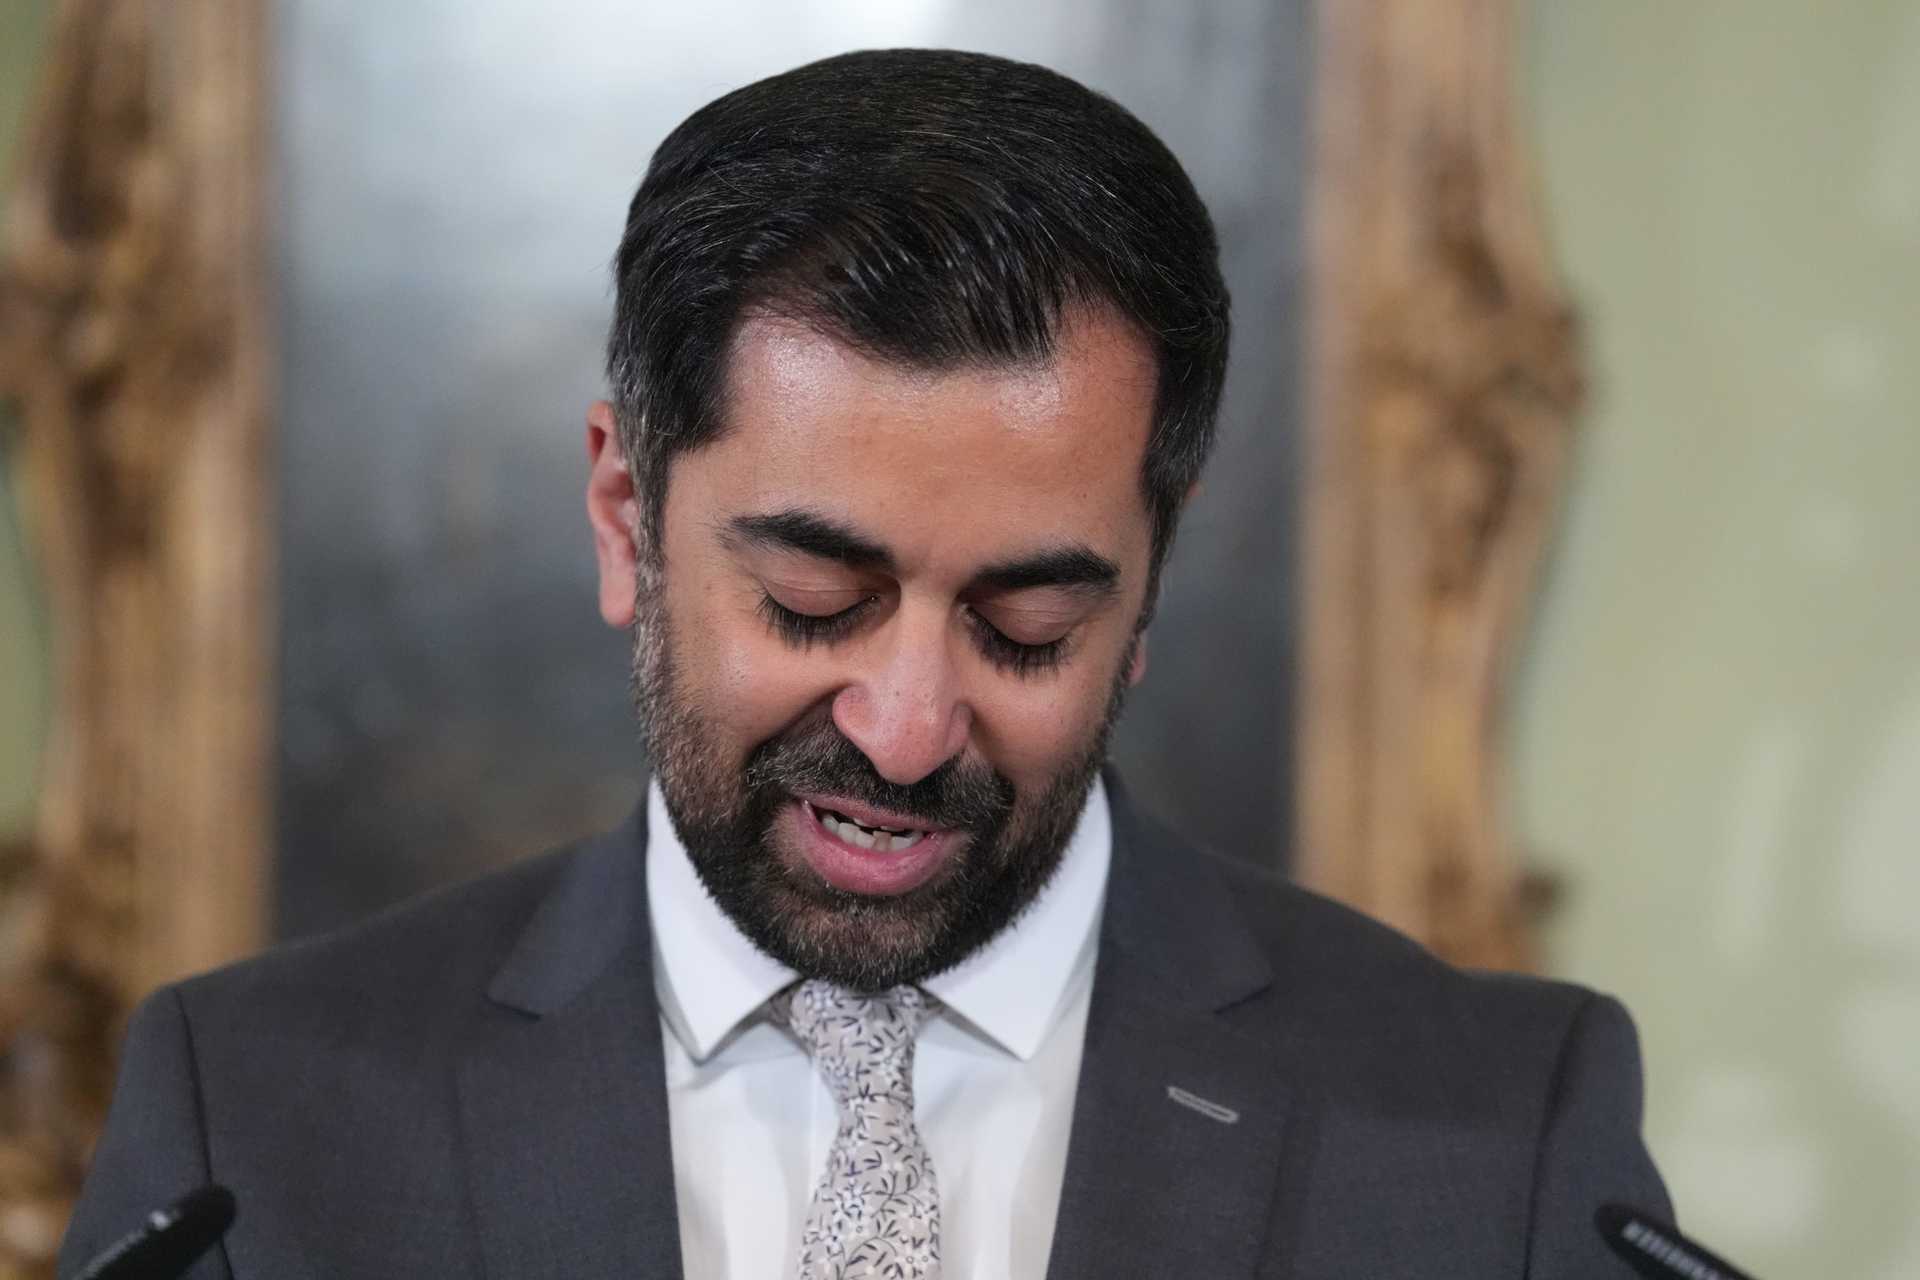 Humza Yousaf is stepping down as Scotland's First Minister a little over a year into his premiership.